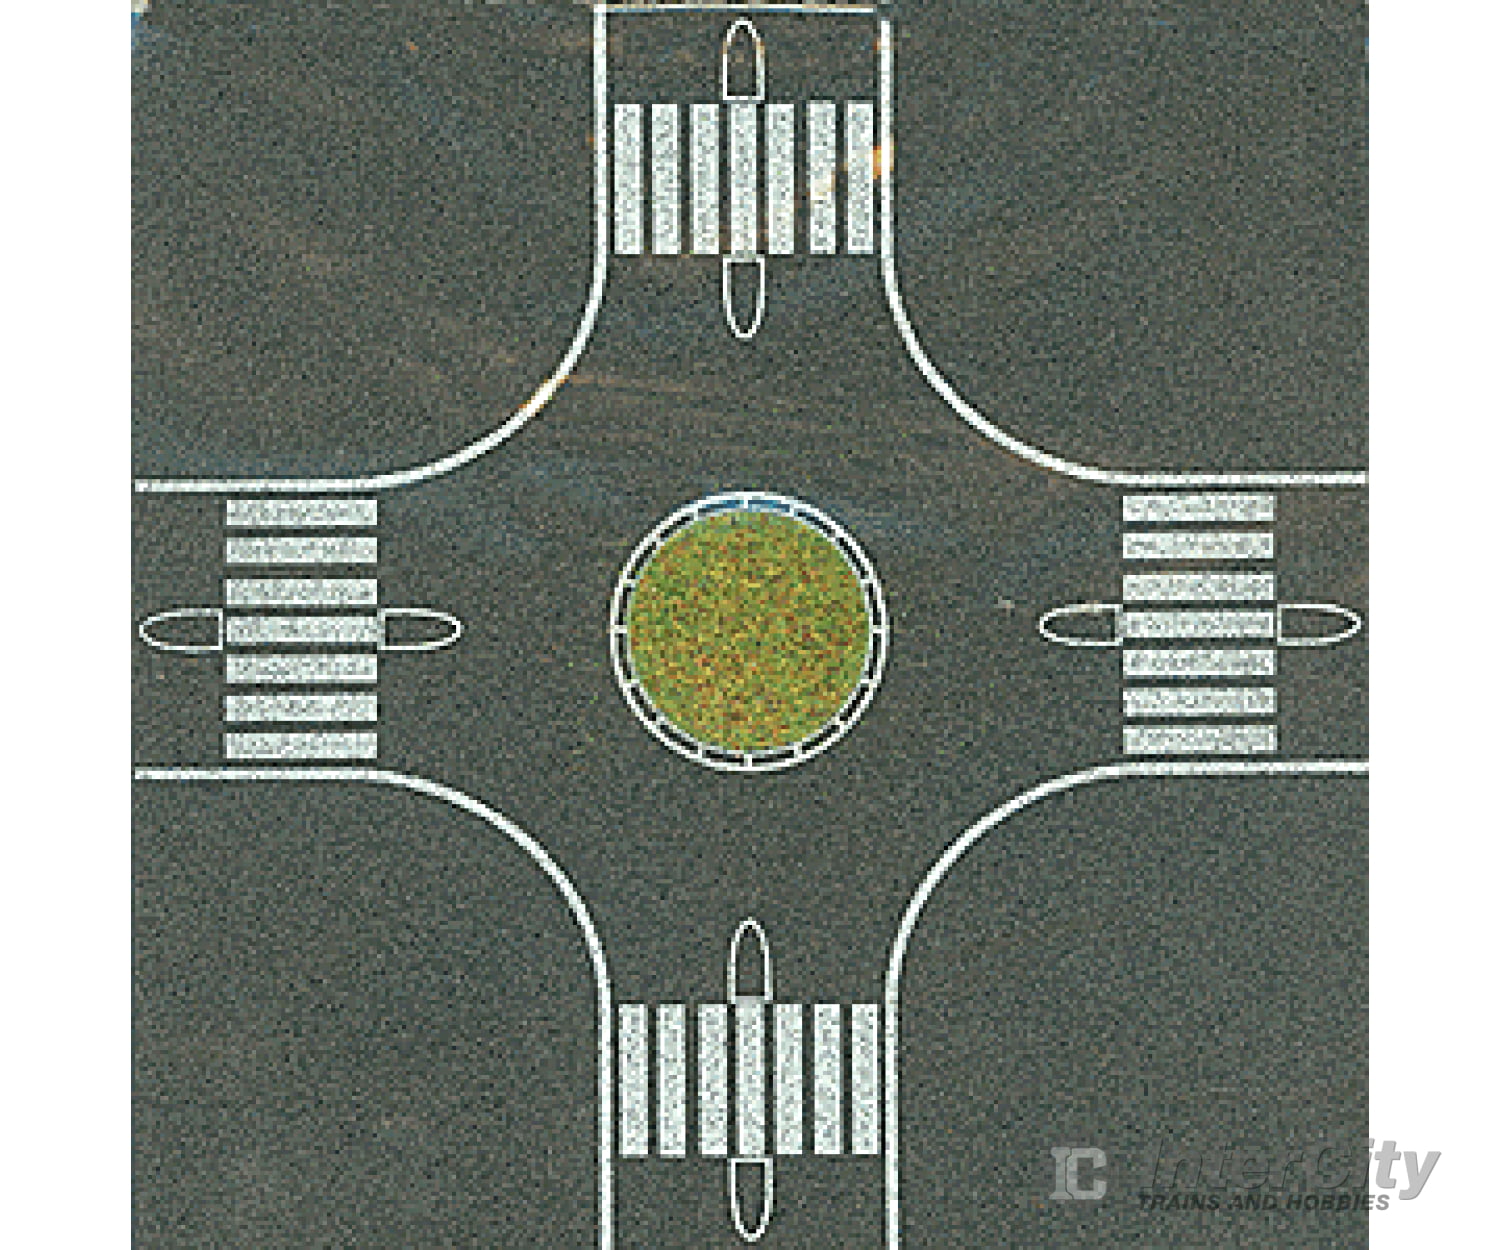 Busch 1102 N Streets/Roadway 4-Way Roundabout -- 6-3/8 X 6-3/8’ 16 16Cm Roads & Streets